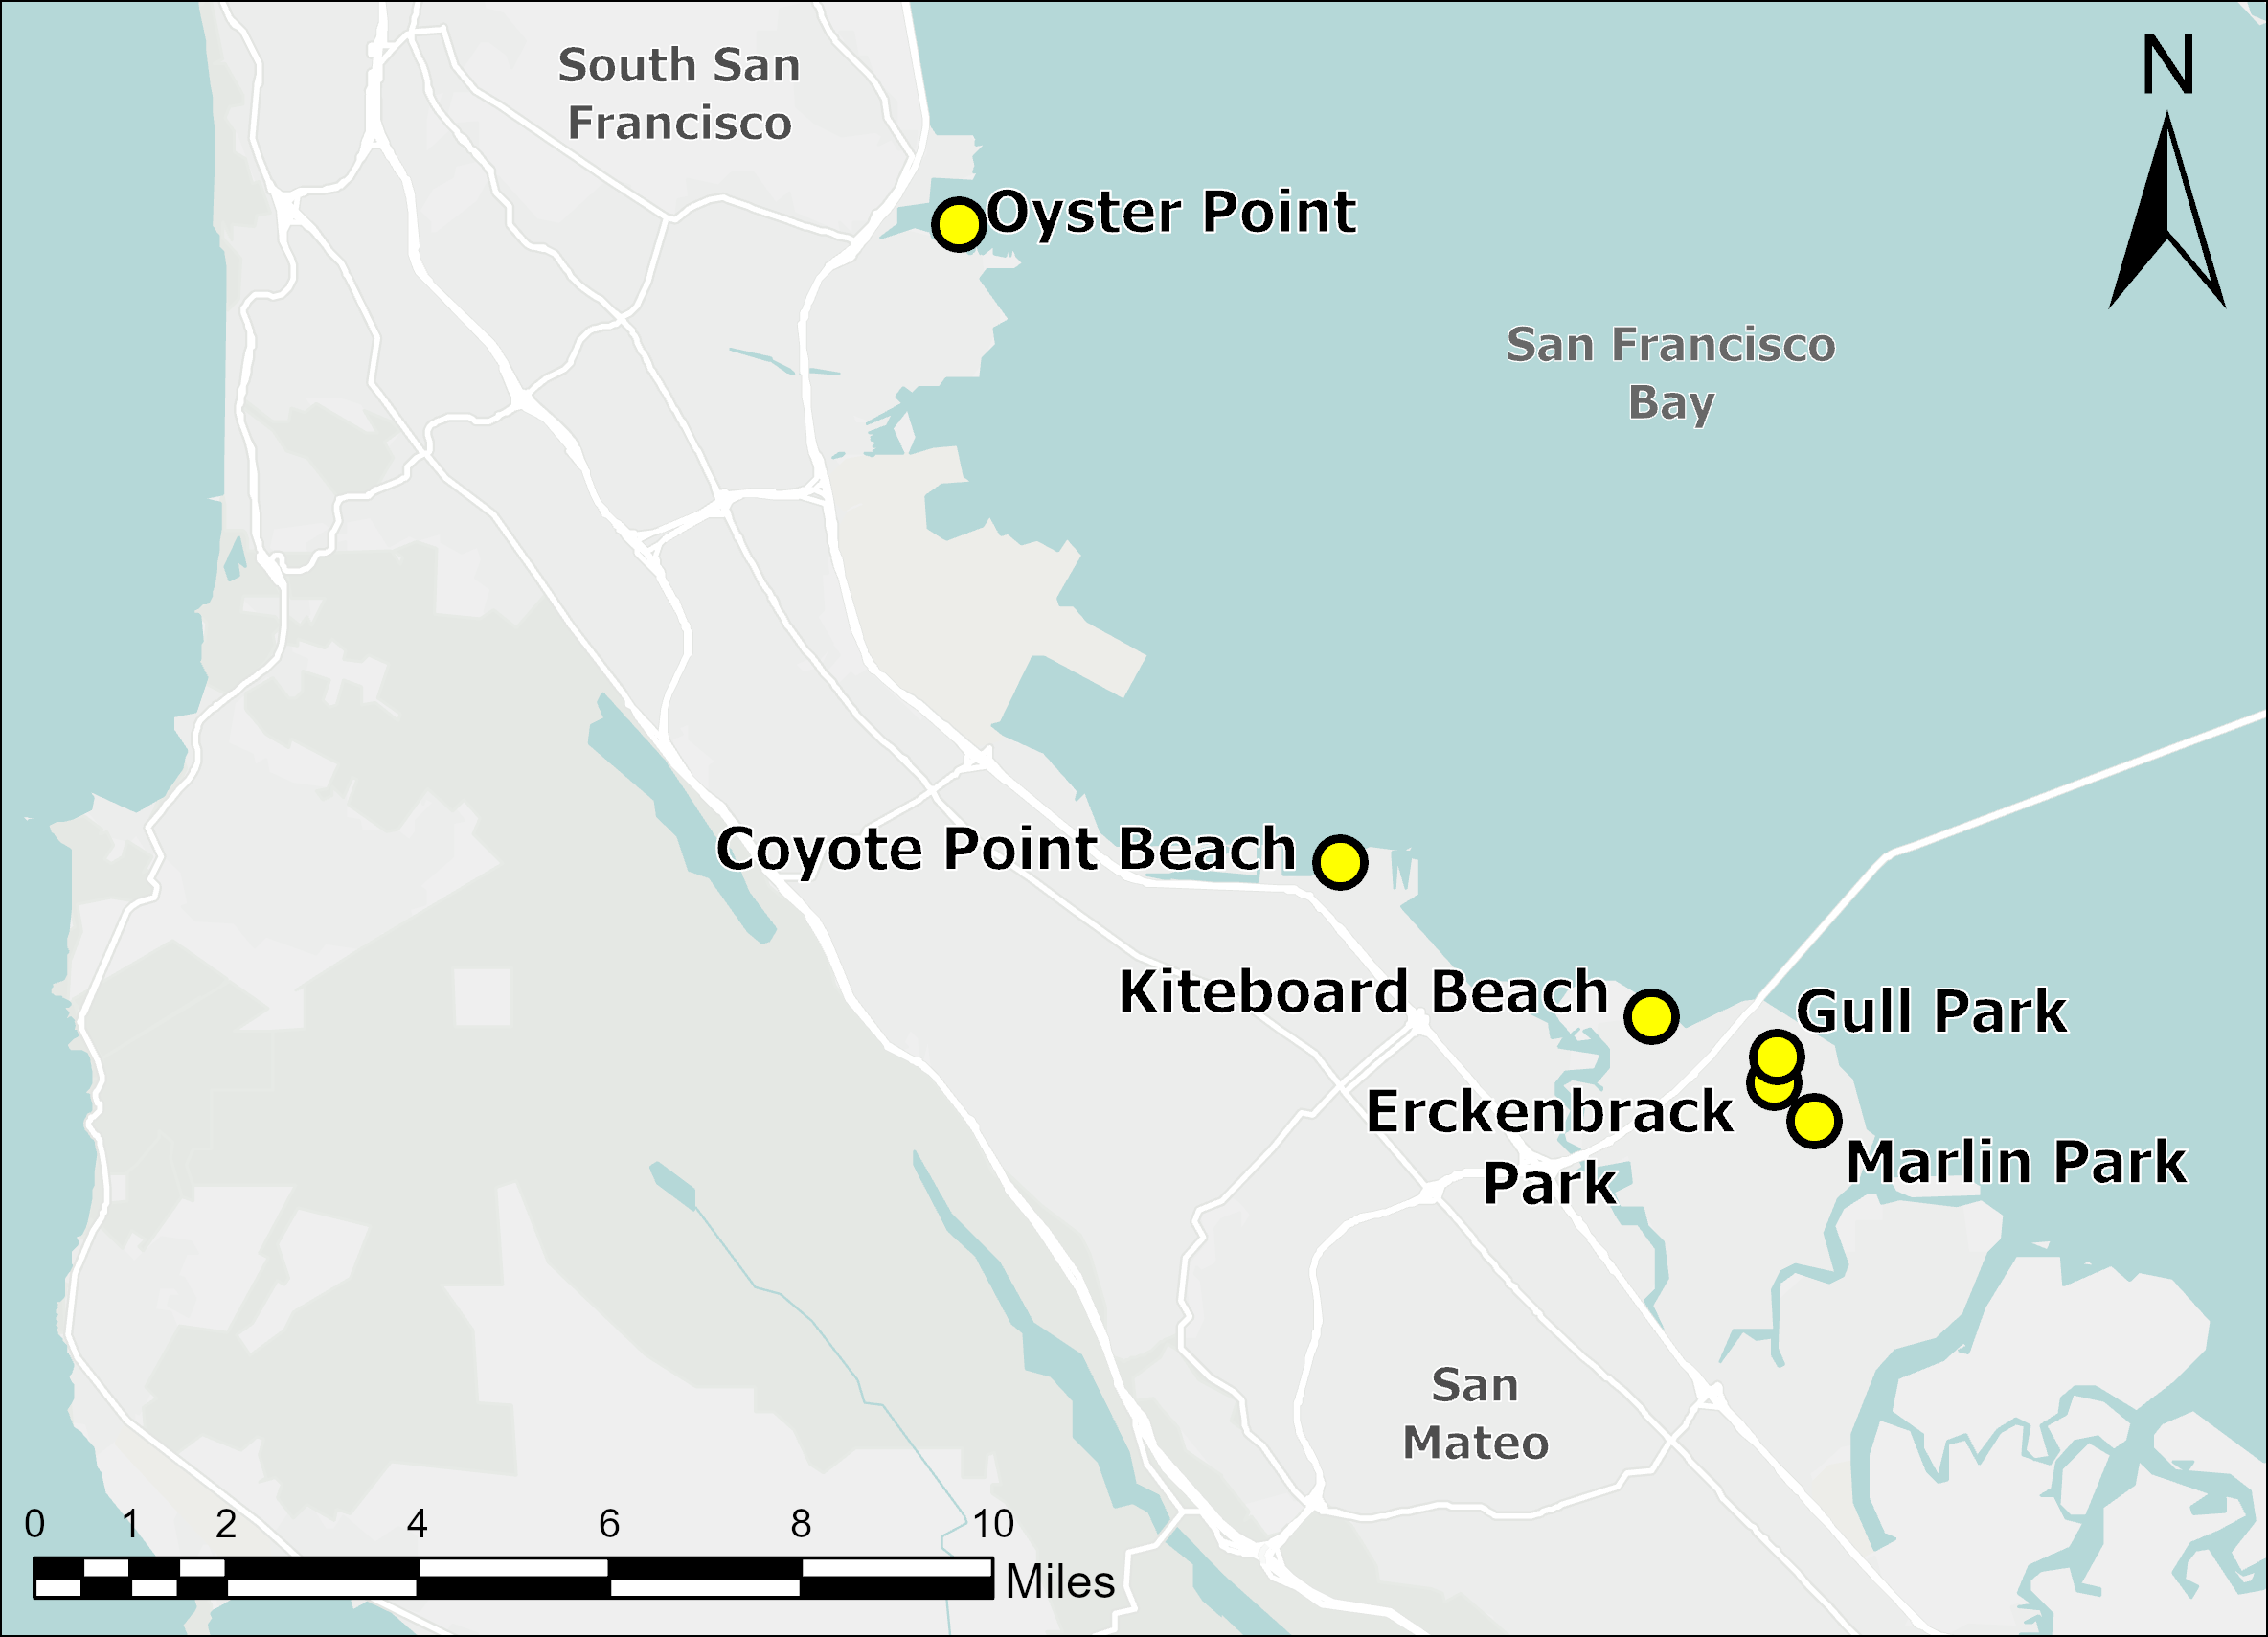 Map of a portion of San Francisco Bay showing the locations of Kiteboard Beach and Oyster Point.